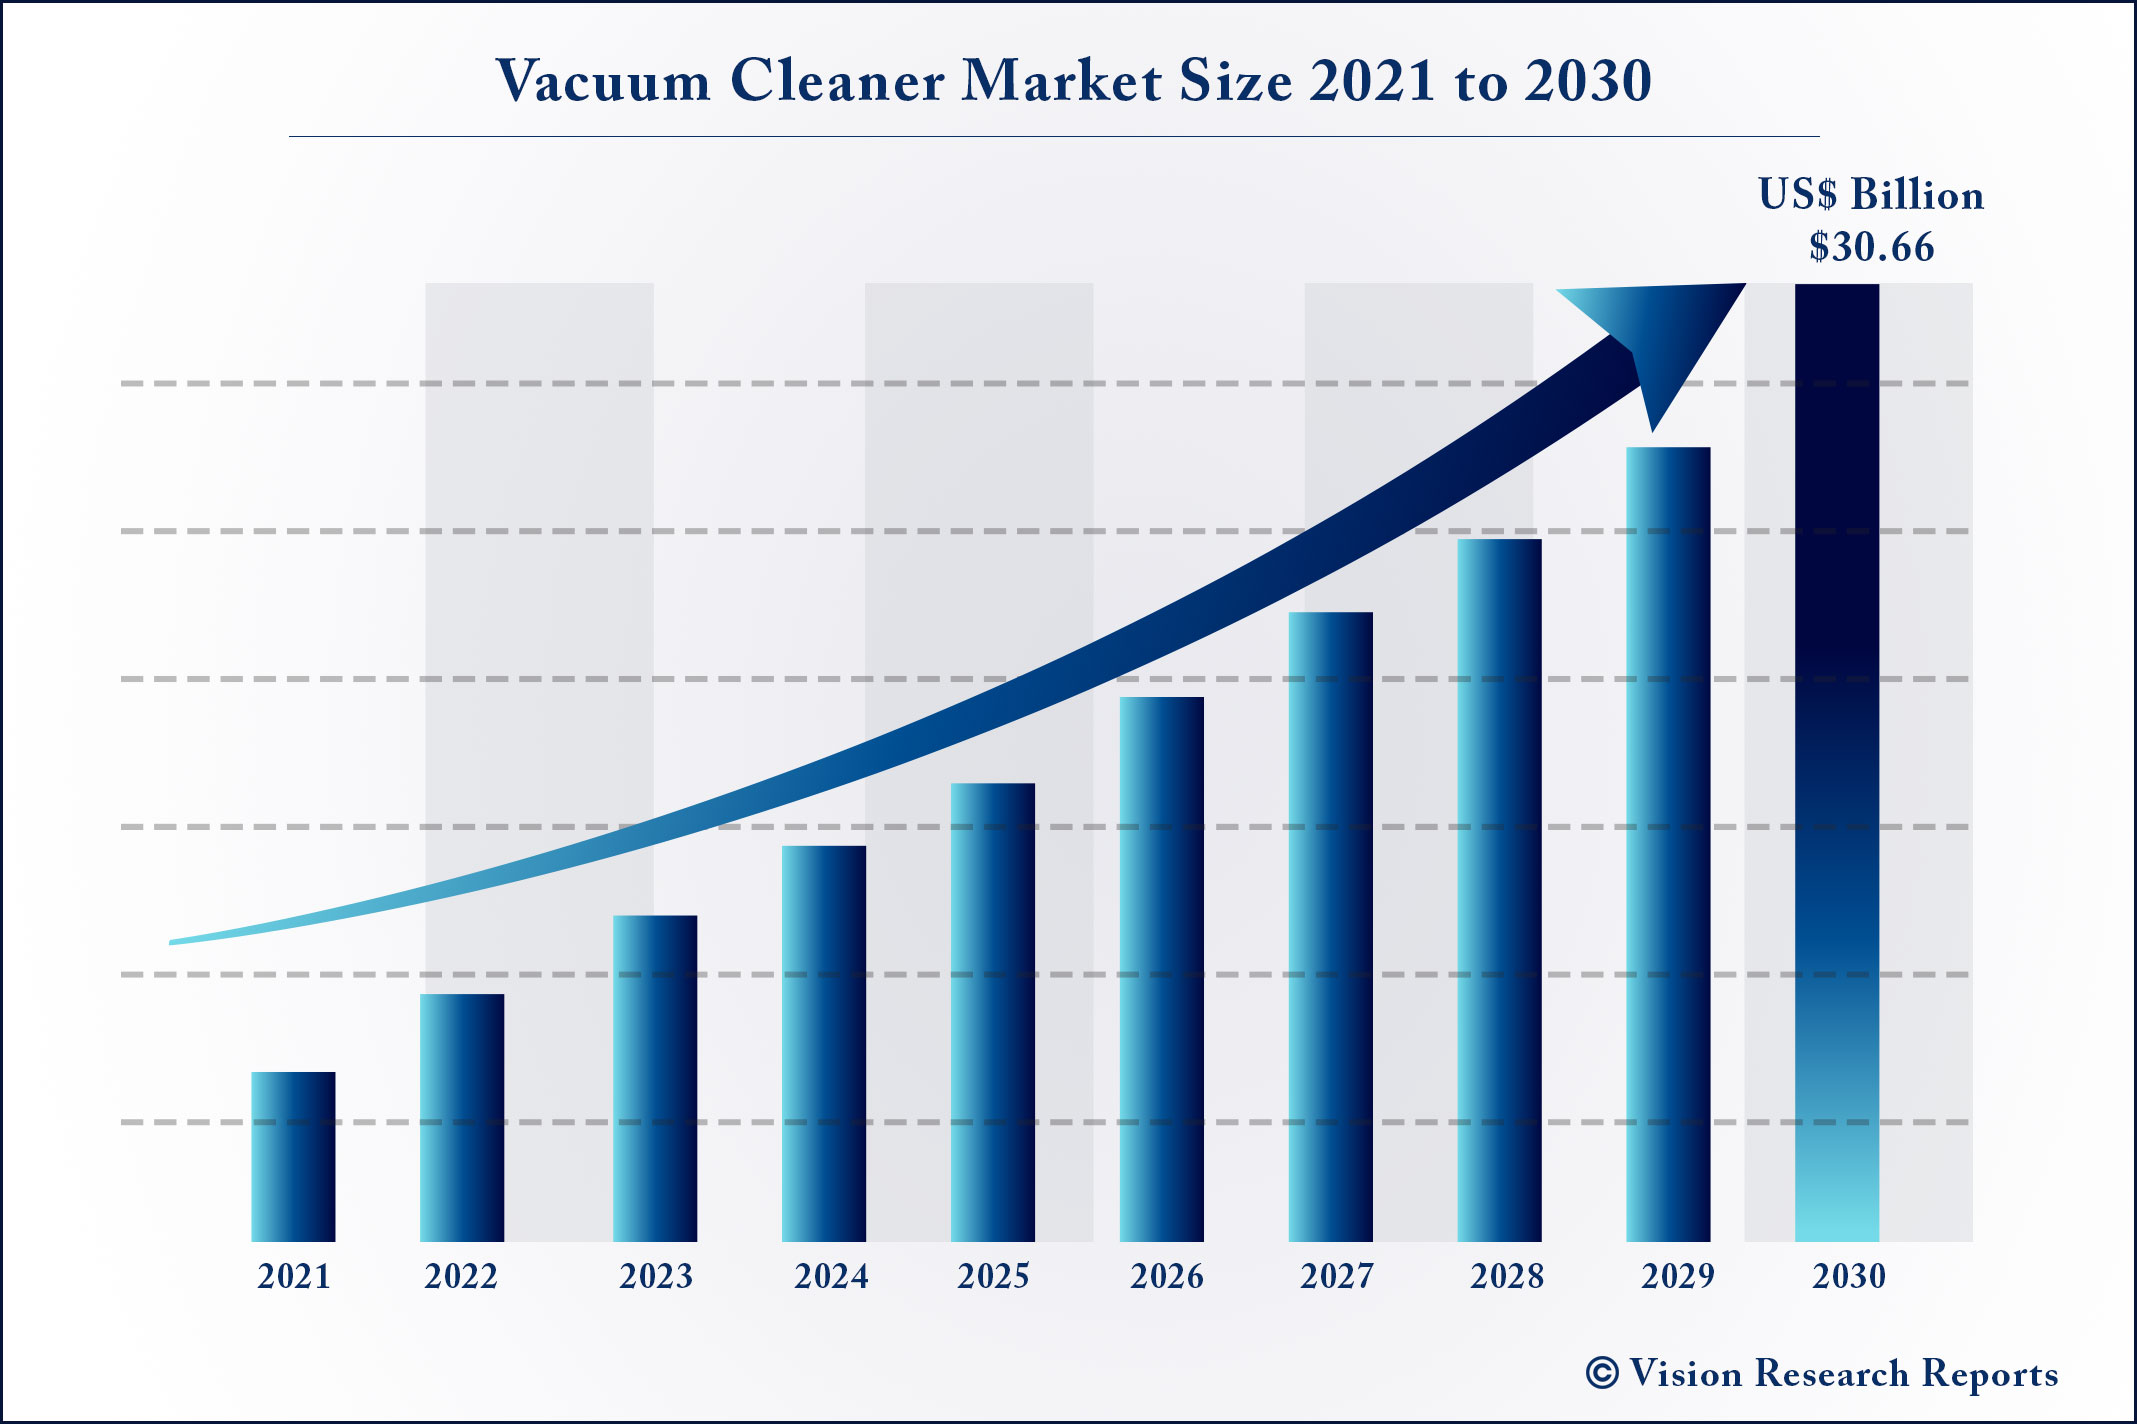 Vacuum Cleaner Market Size 2021 to 2030